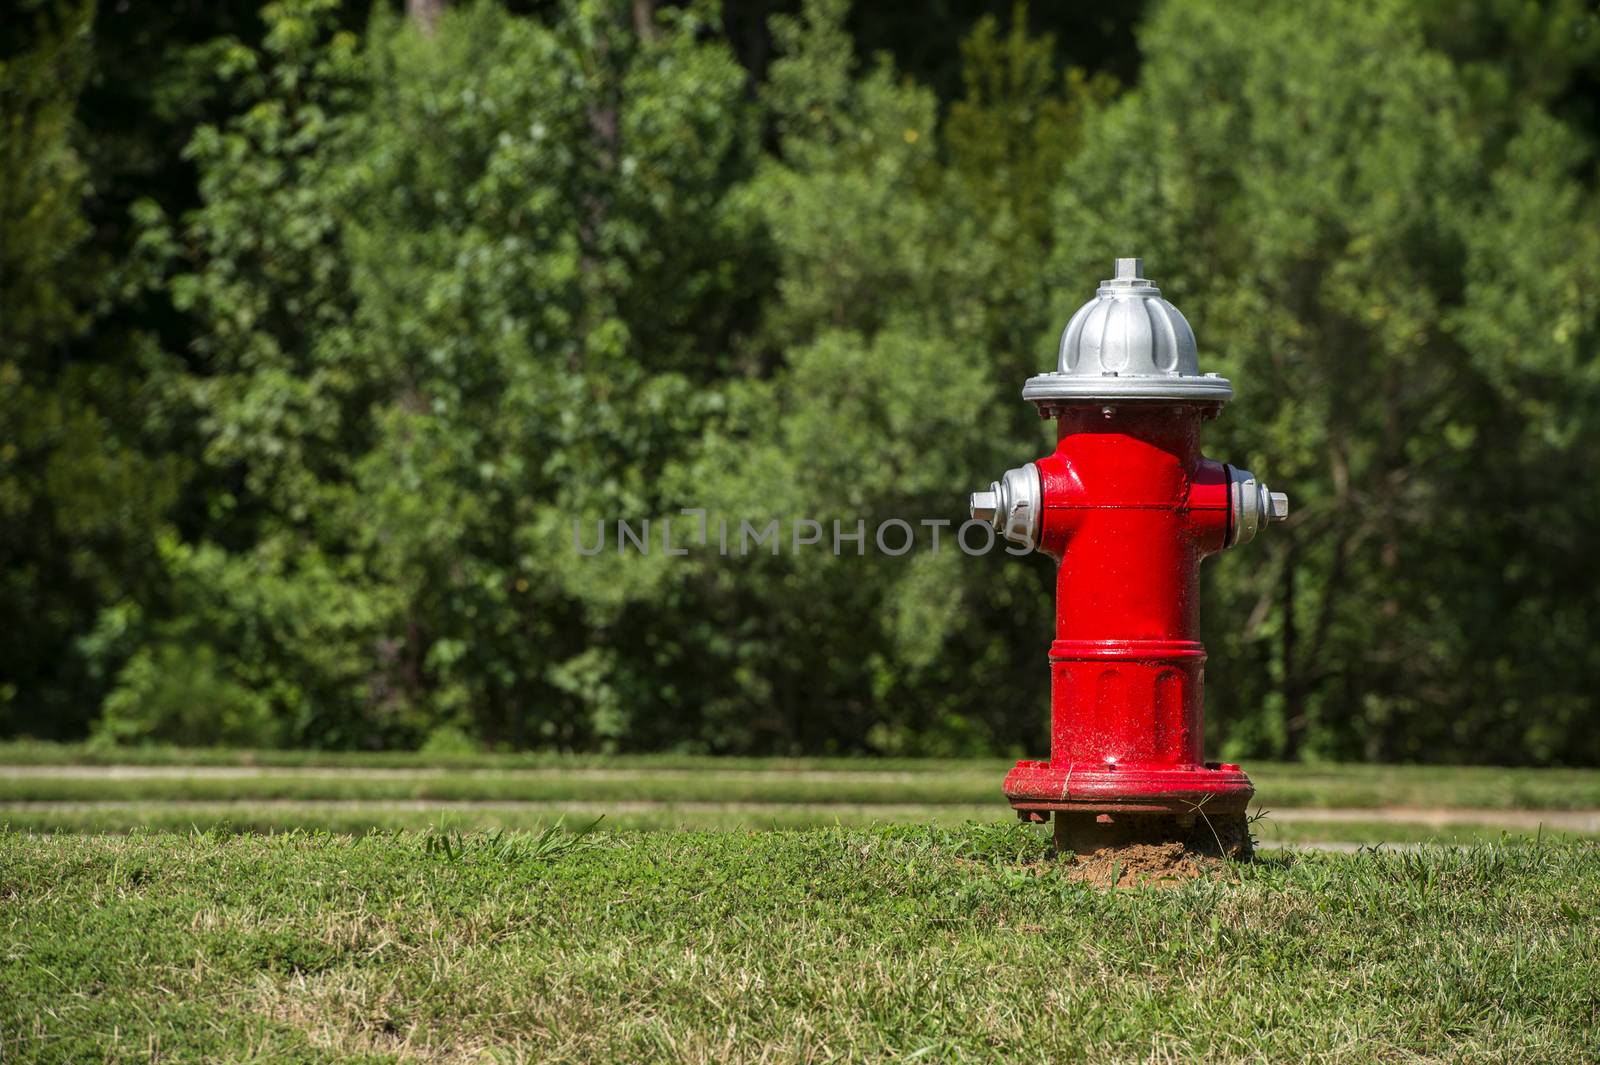 A red fire hydrant at a local park